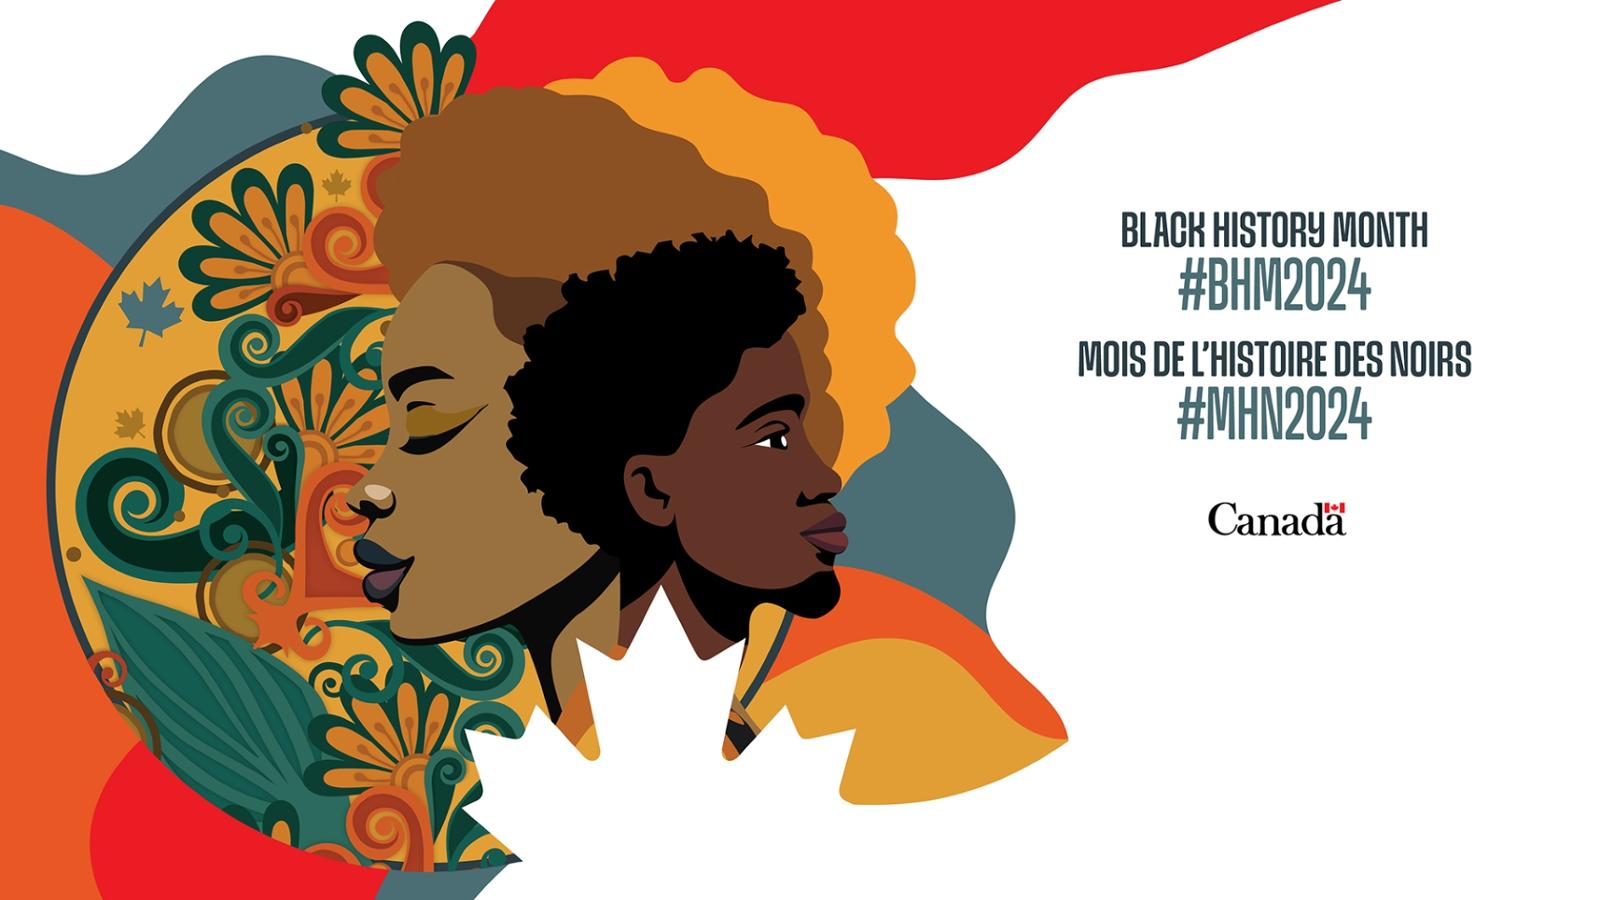 Graphic featuring the images of two Black Canadians and a stylized maple leaf Image courtesy Government of Canada